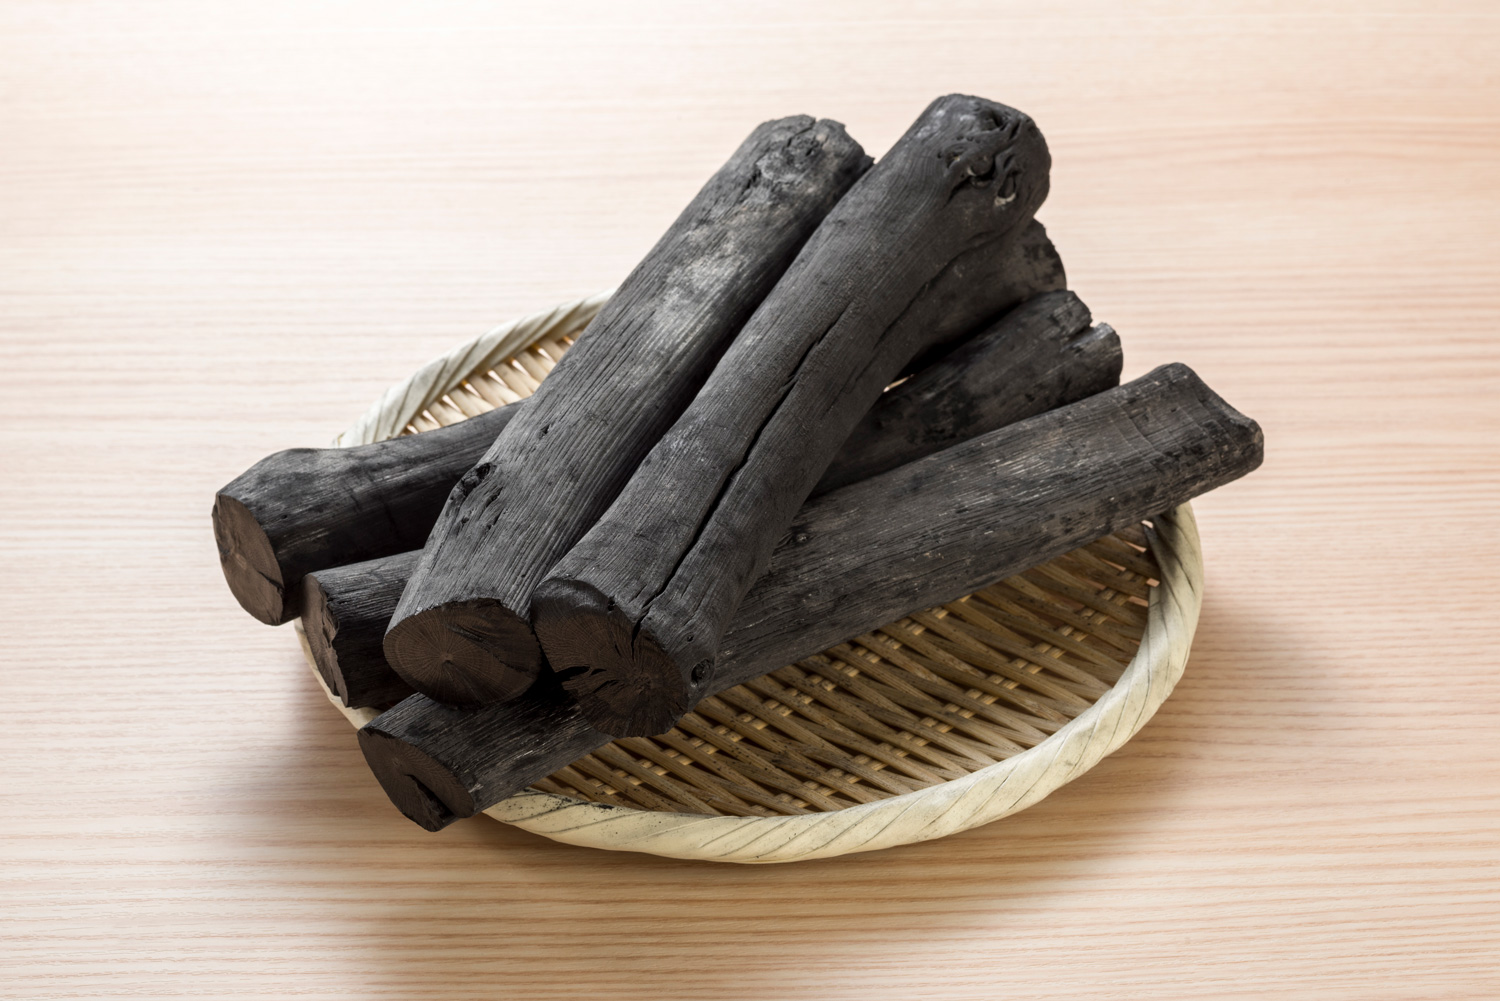 white charcoal made of quercus phillyraeoides, Bincho-Tan